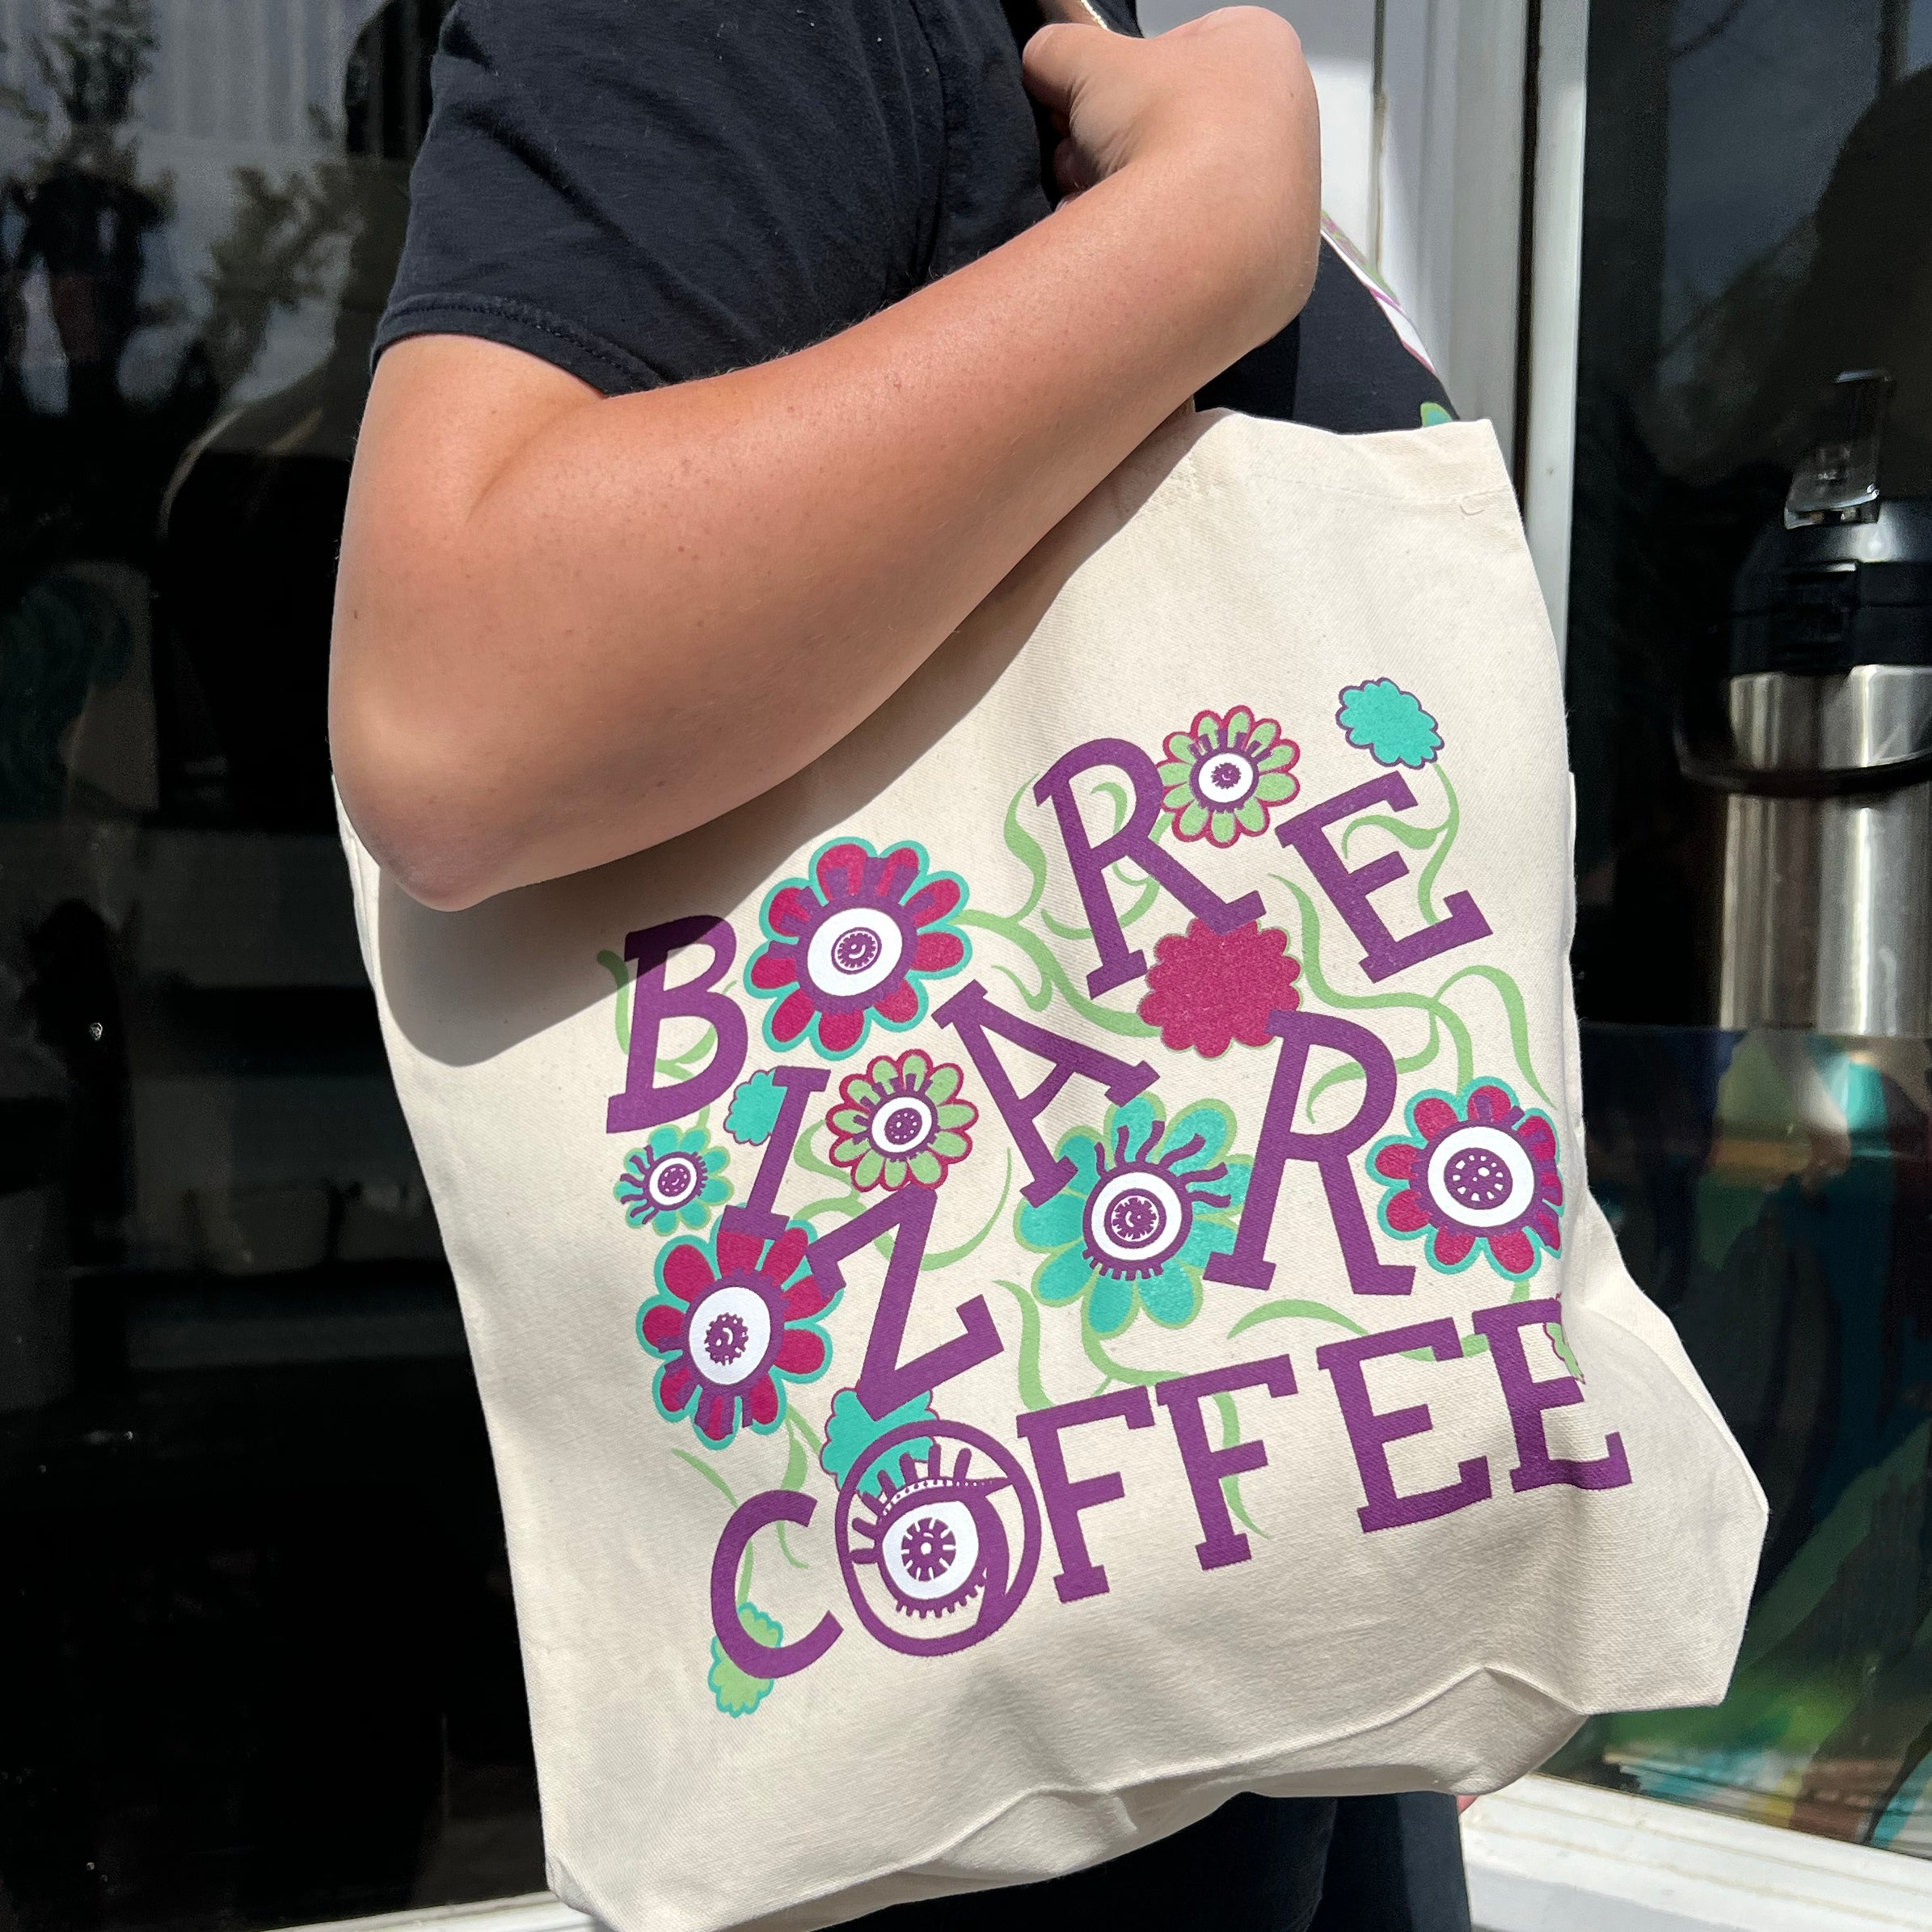 A canvas tote bag that says Bizarre Coffee in purple letters with flowers and eyes.